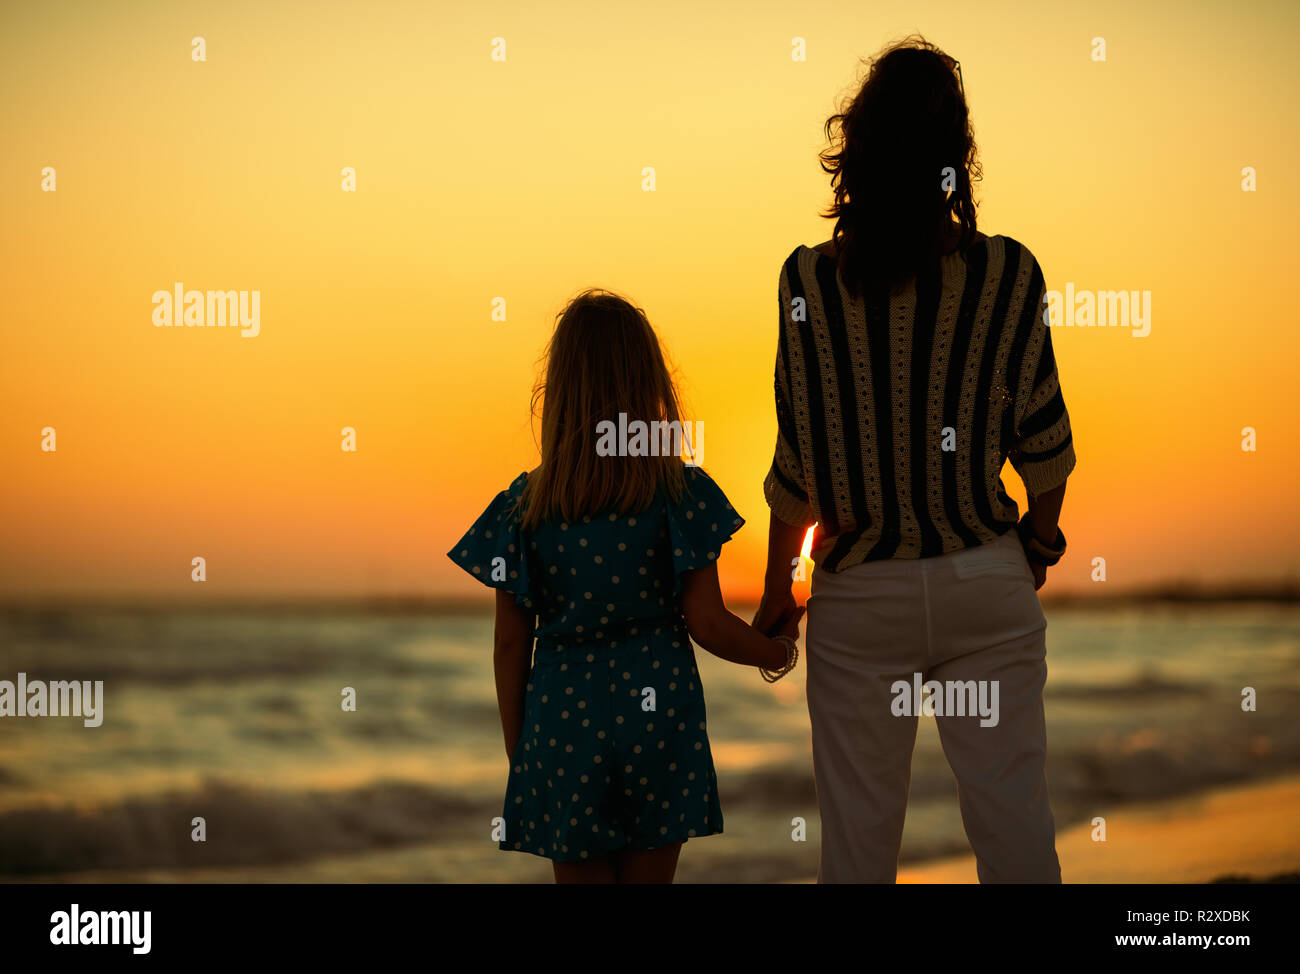 Seen From Behind Mother And Daughter On The Beach In The Evening Looking Into The Distance Mother And Daughter Catch Moments Leisure Sunset Idyllic Stock Photo Alamy